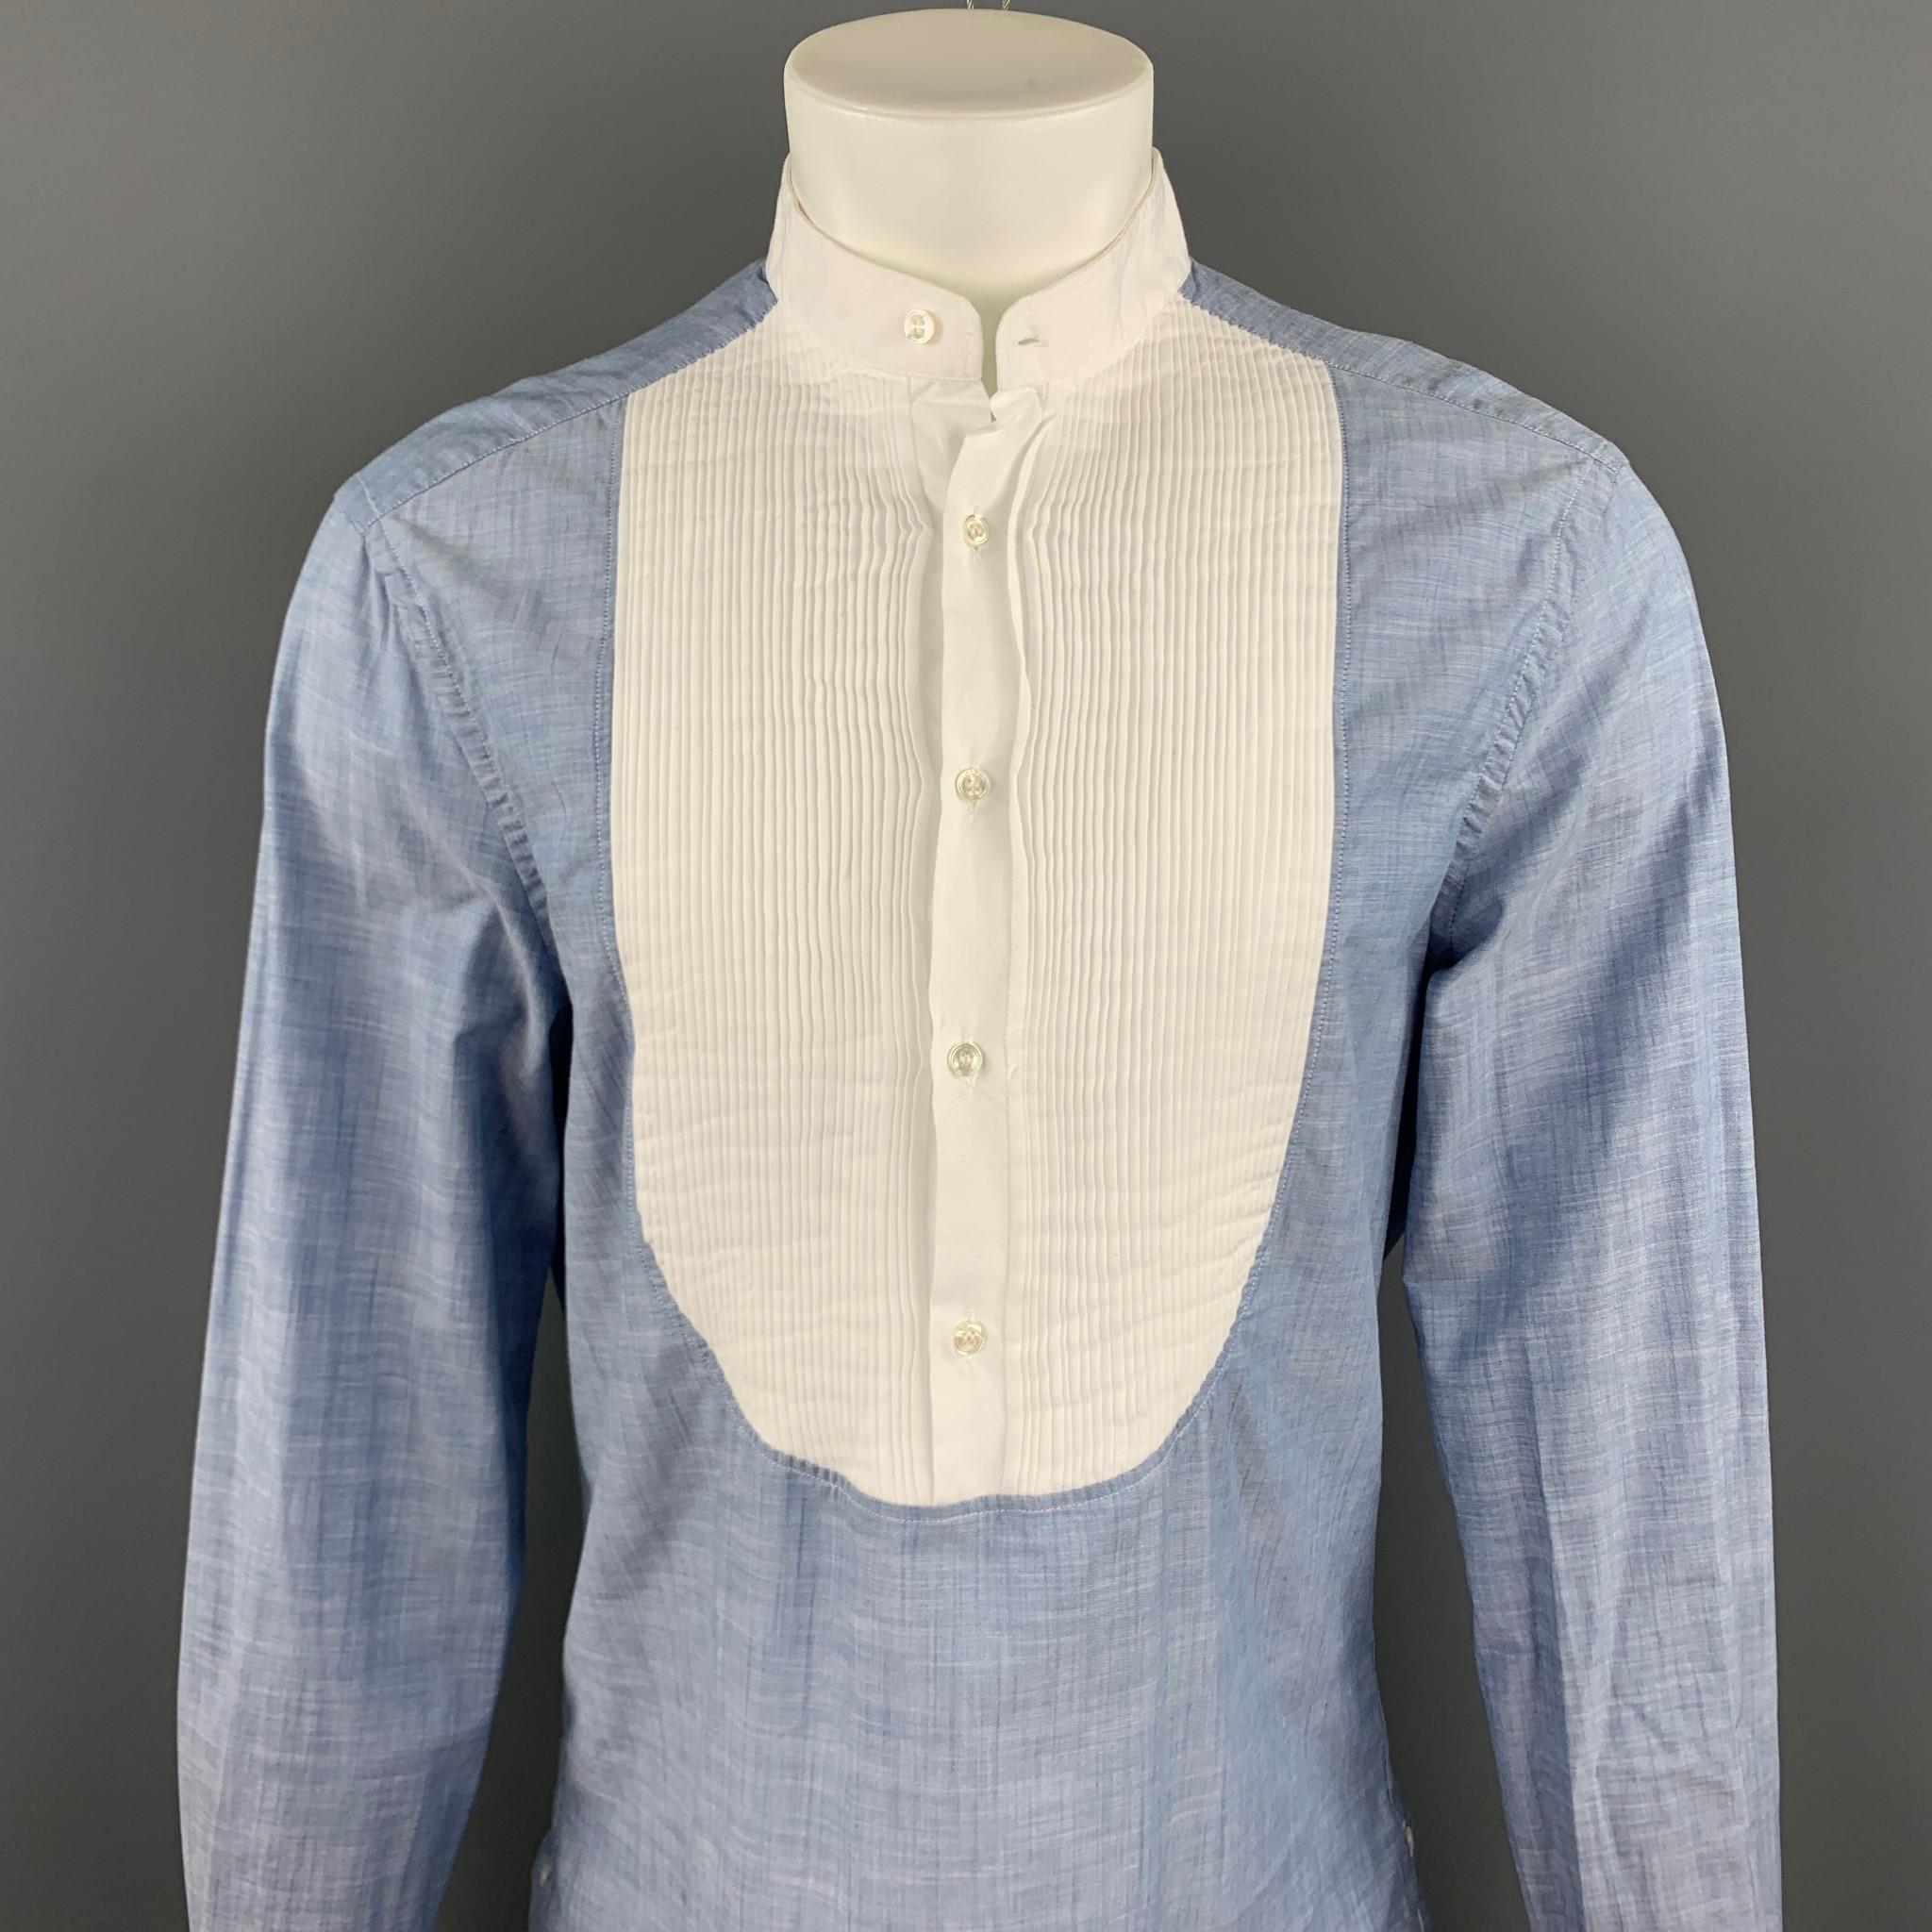 MICHAEL BASTIAN long sleeve shirt comes in a blue cotton with a white pleated panel chest detail featuring a nehru collar and a half button closure. Made in Italy.

Very Good Pre-Owned Condition.
Marked: 16.5/42

Measurements:

Shoulder: 19